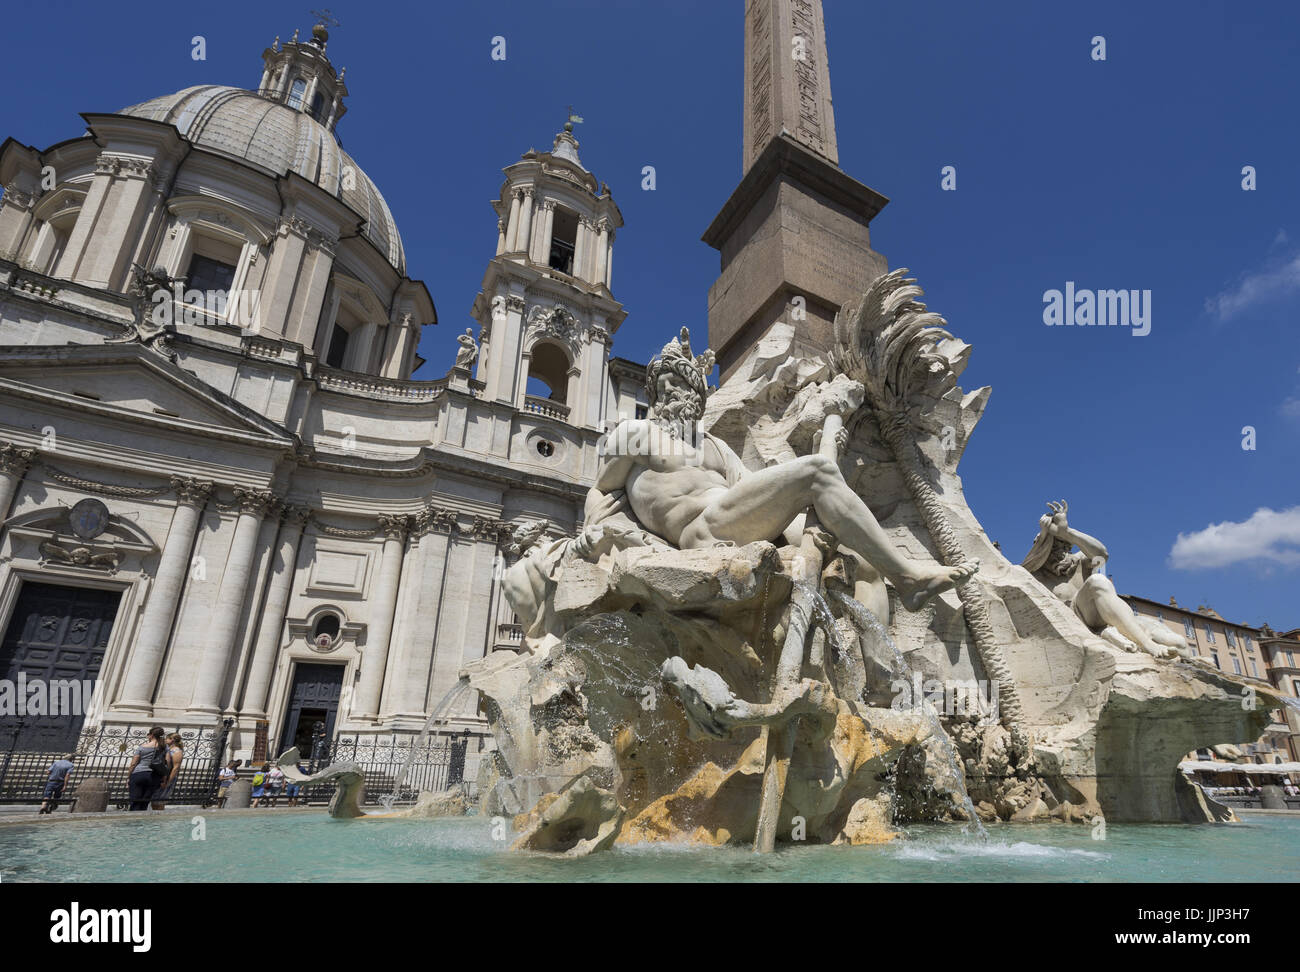 Famous Piazza Navona Square Fountain of the Four Rivers with an Egyptian obelisk in Piazza Navona. Rome, Italy. June 2017 Stock Photo